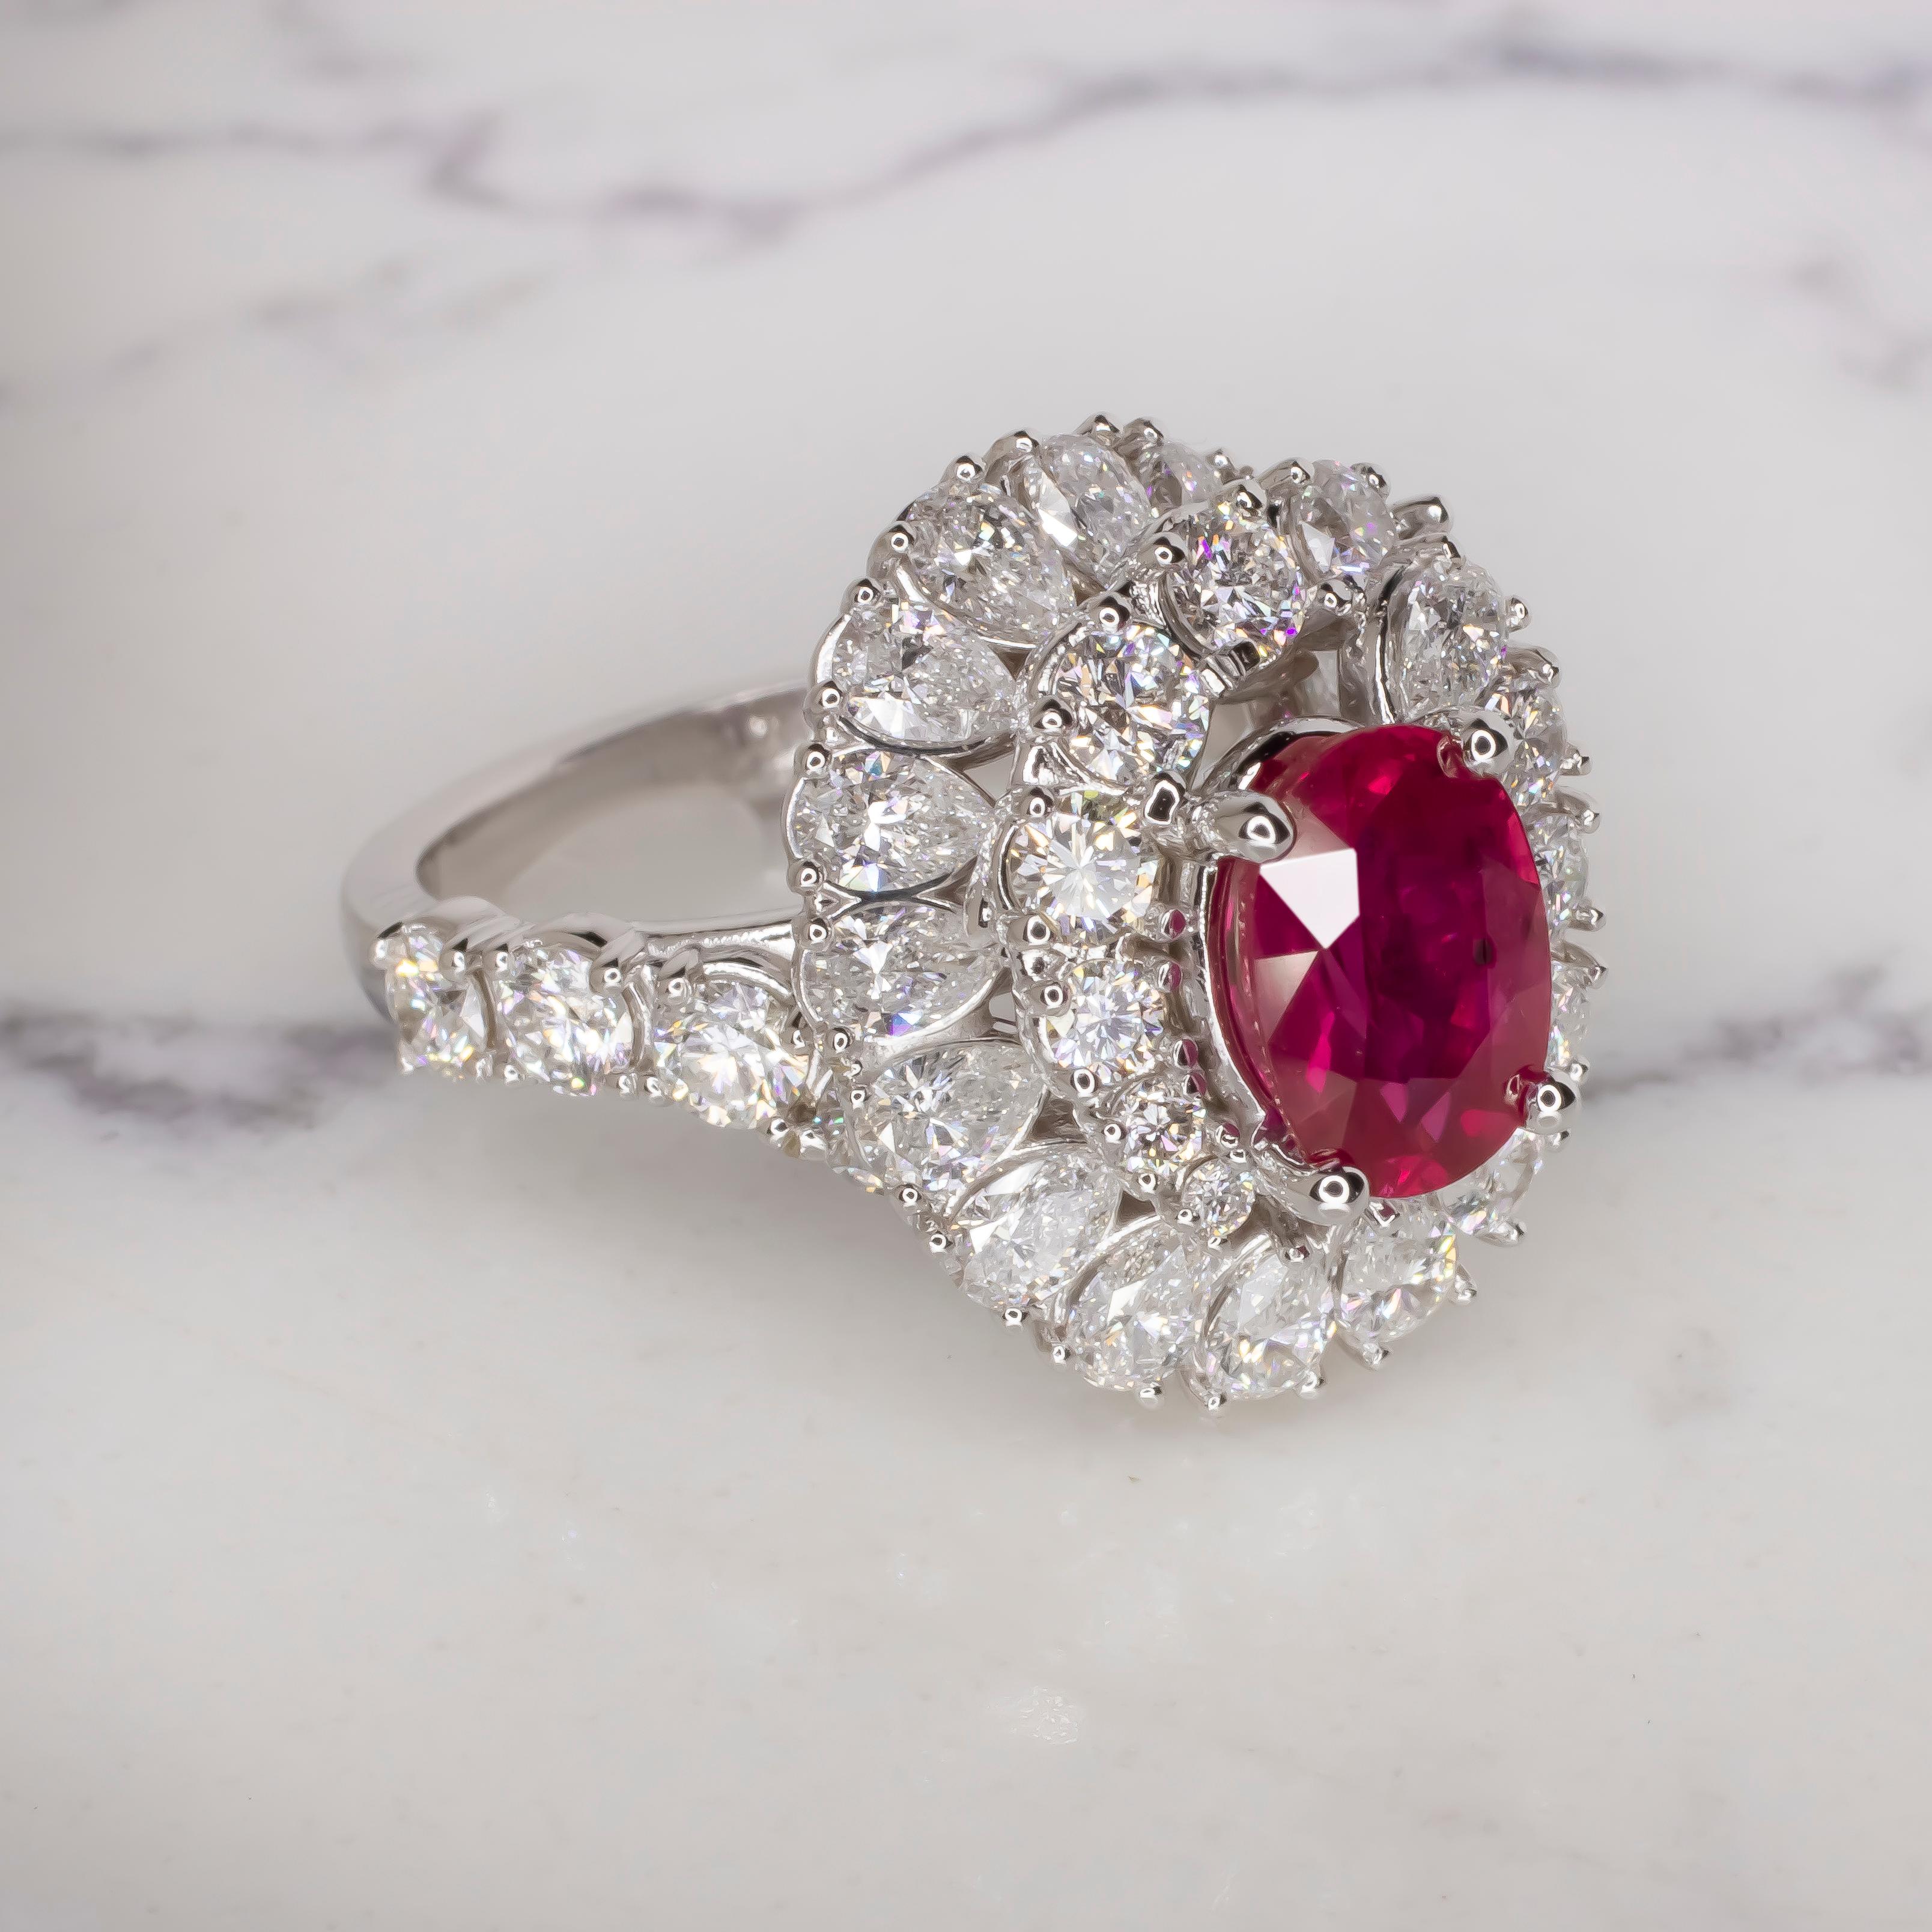 Enchanting 2.04 Carat GIA-Certified Oval Ruby Ring with Diamond Grandeur in 18K White Gold

Unveiling the Antinori masterpiece, a ring that exudes timeless elegance and extraordinary charm. This luxurious piece features a central 2.04 carat oval